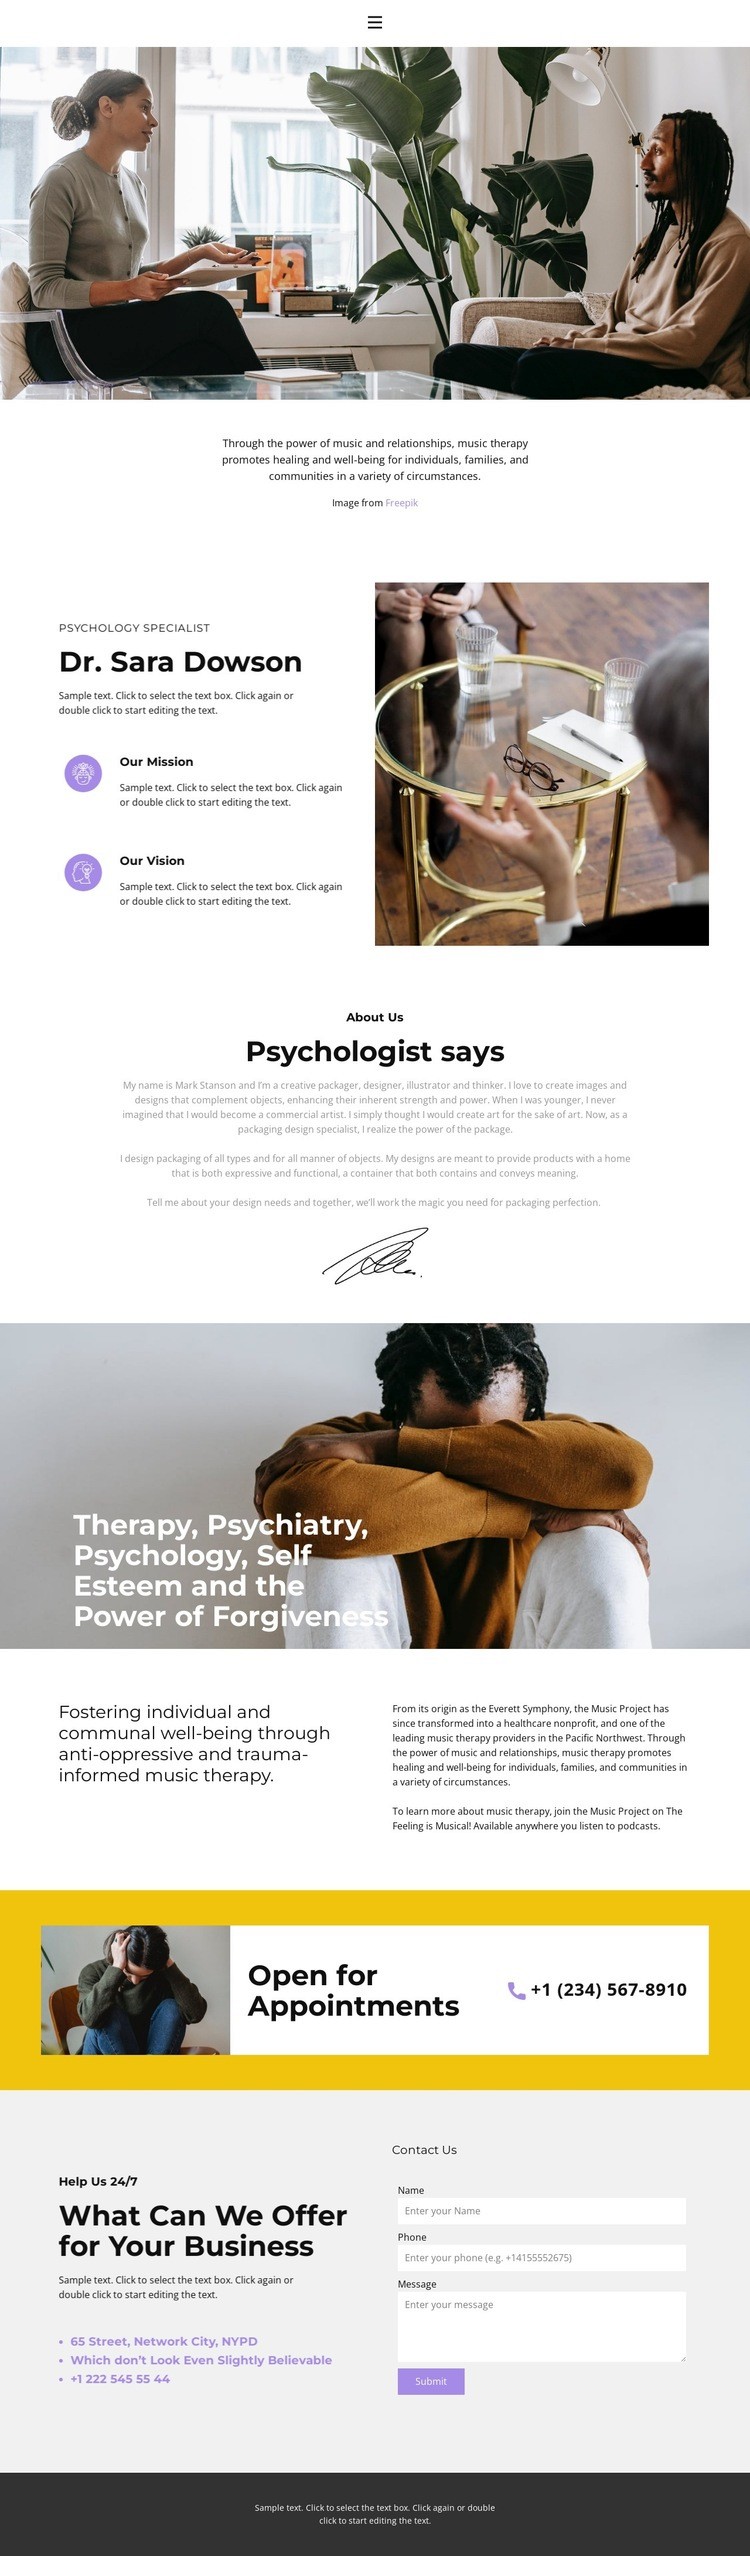 Qualified help from a psychologist Web Page Design